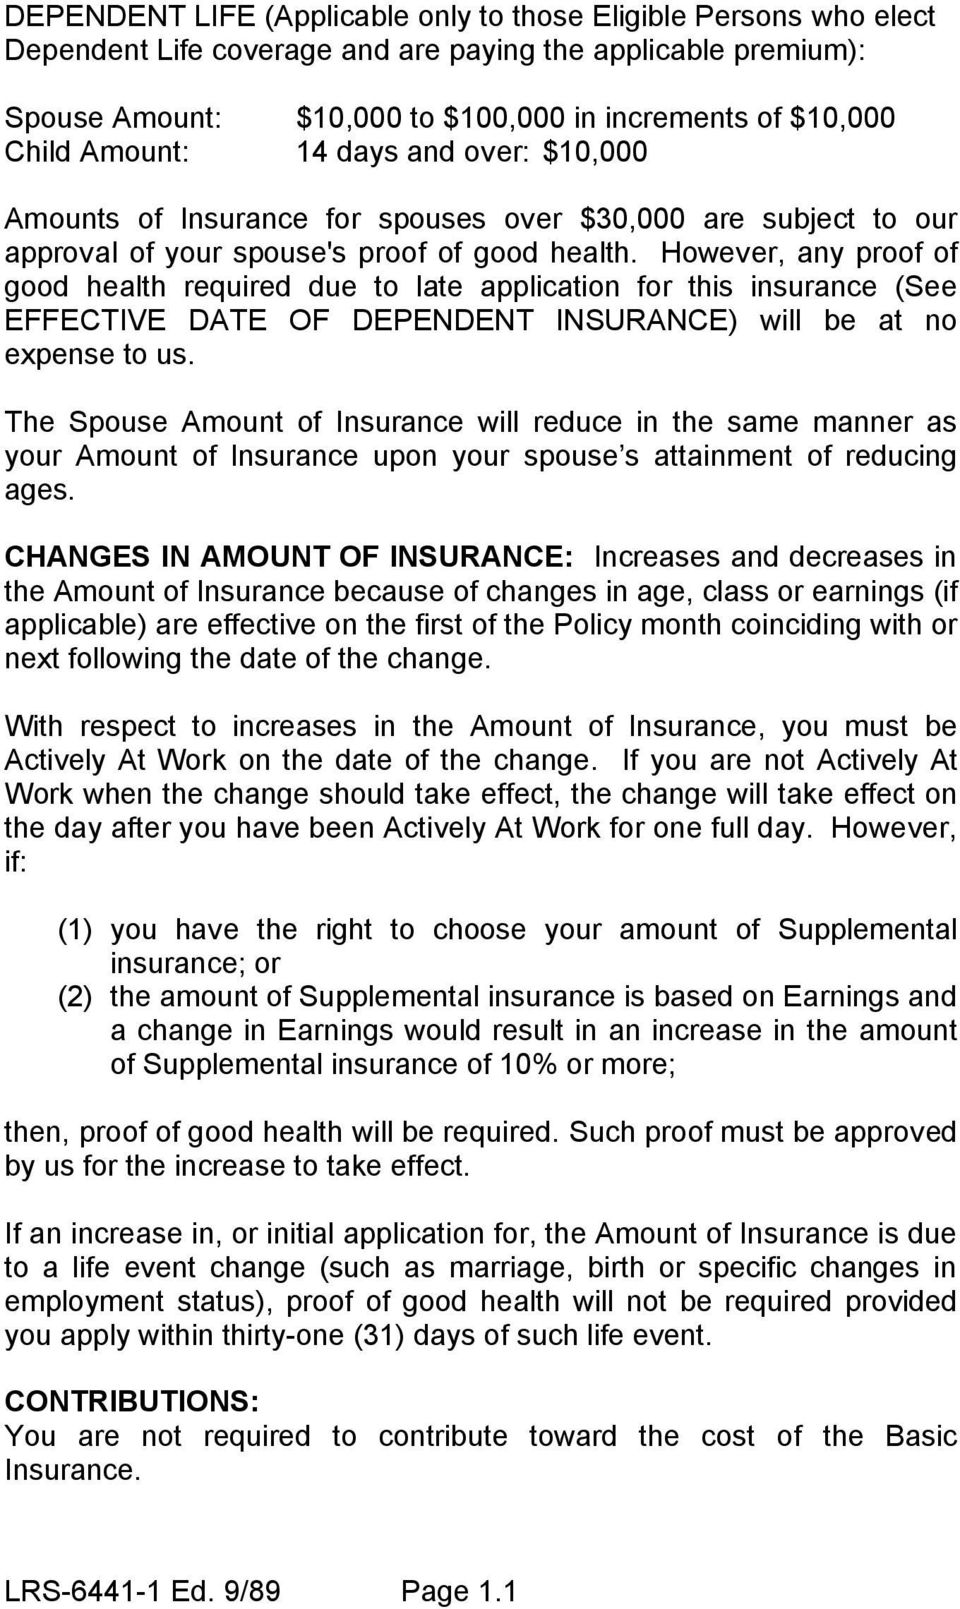 However, any proof of good health required due to late application for this insurance (See EFFECTIVE DATE OF DEPENDENT INSURANCE) will be at no expense to us.